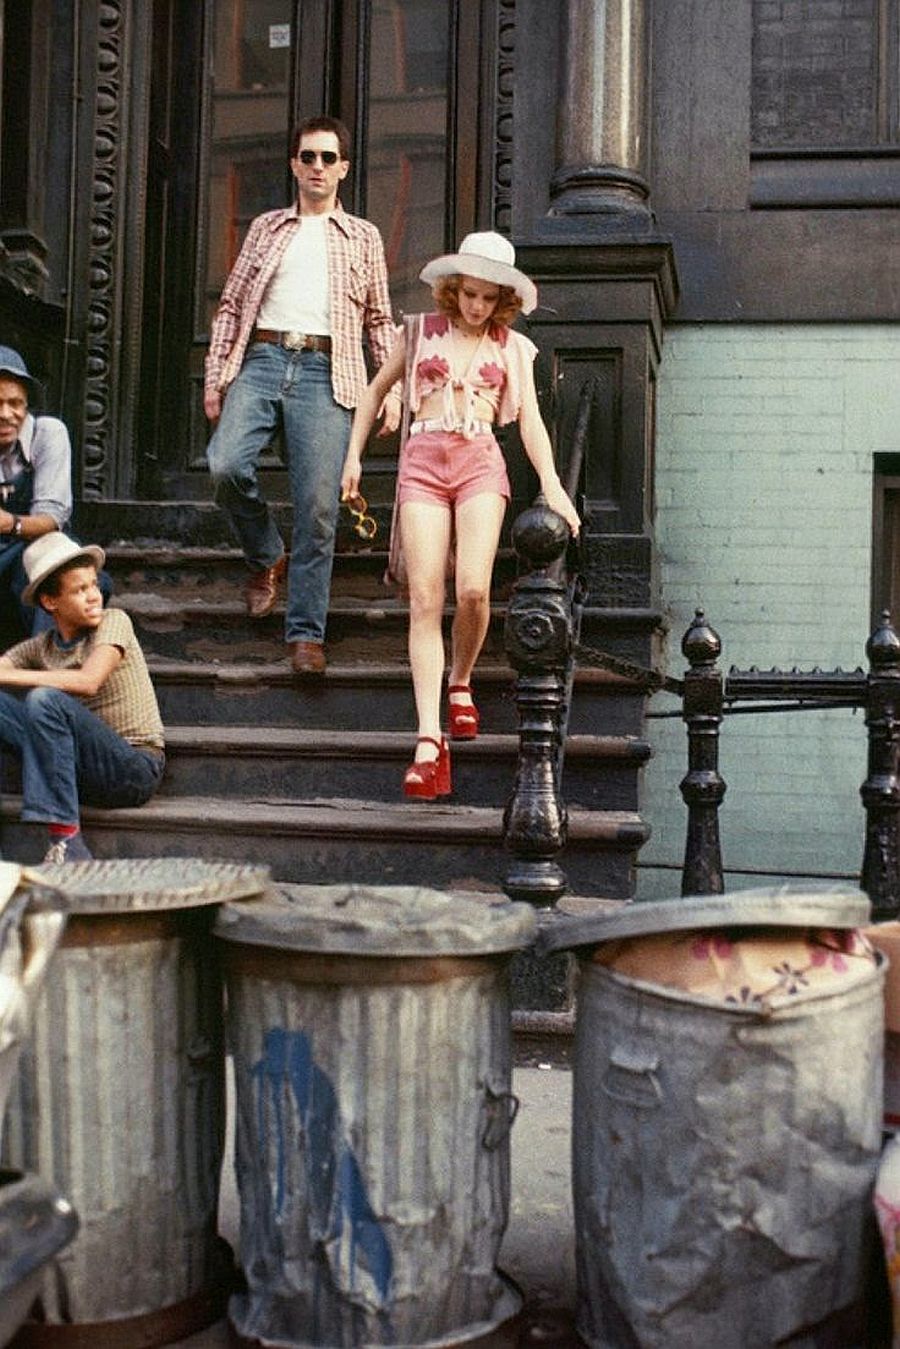 behind-the-scenes-jodie-foster-on-the-set-of-taxi-driver-1976-08